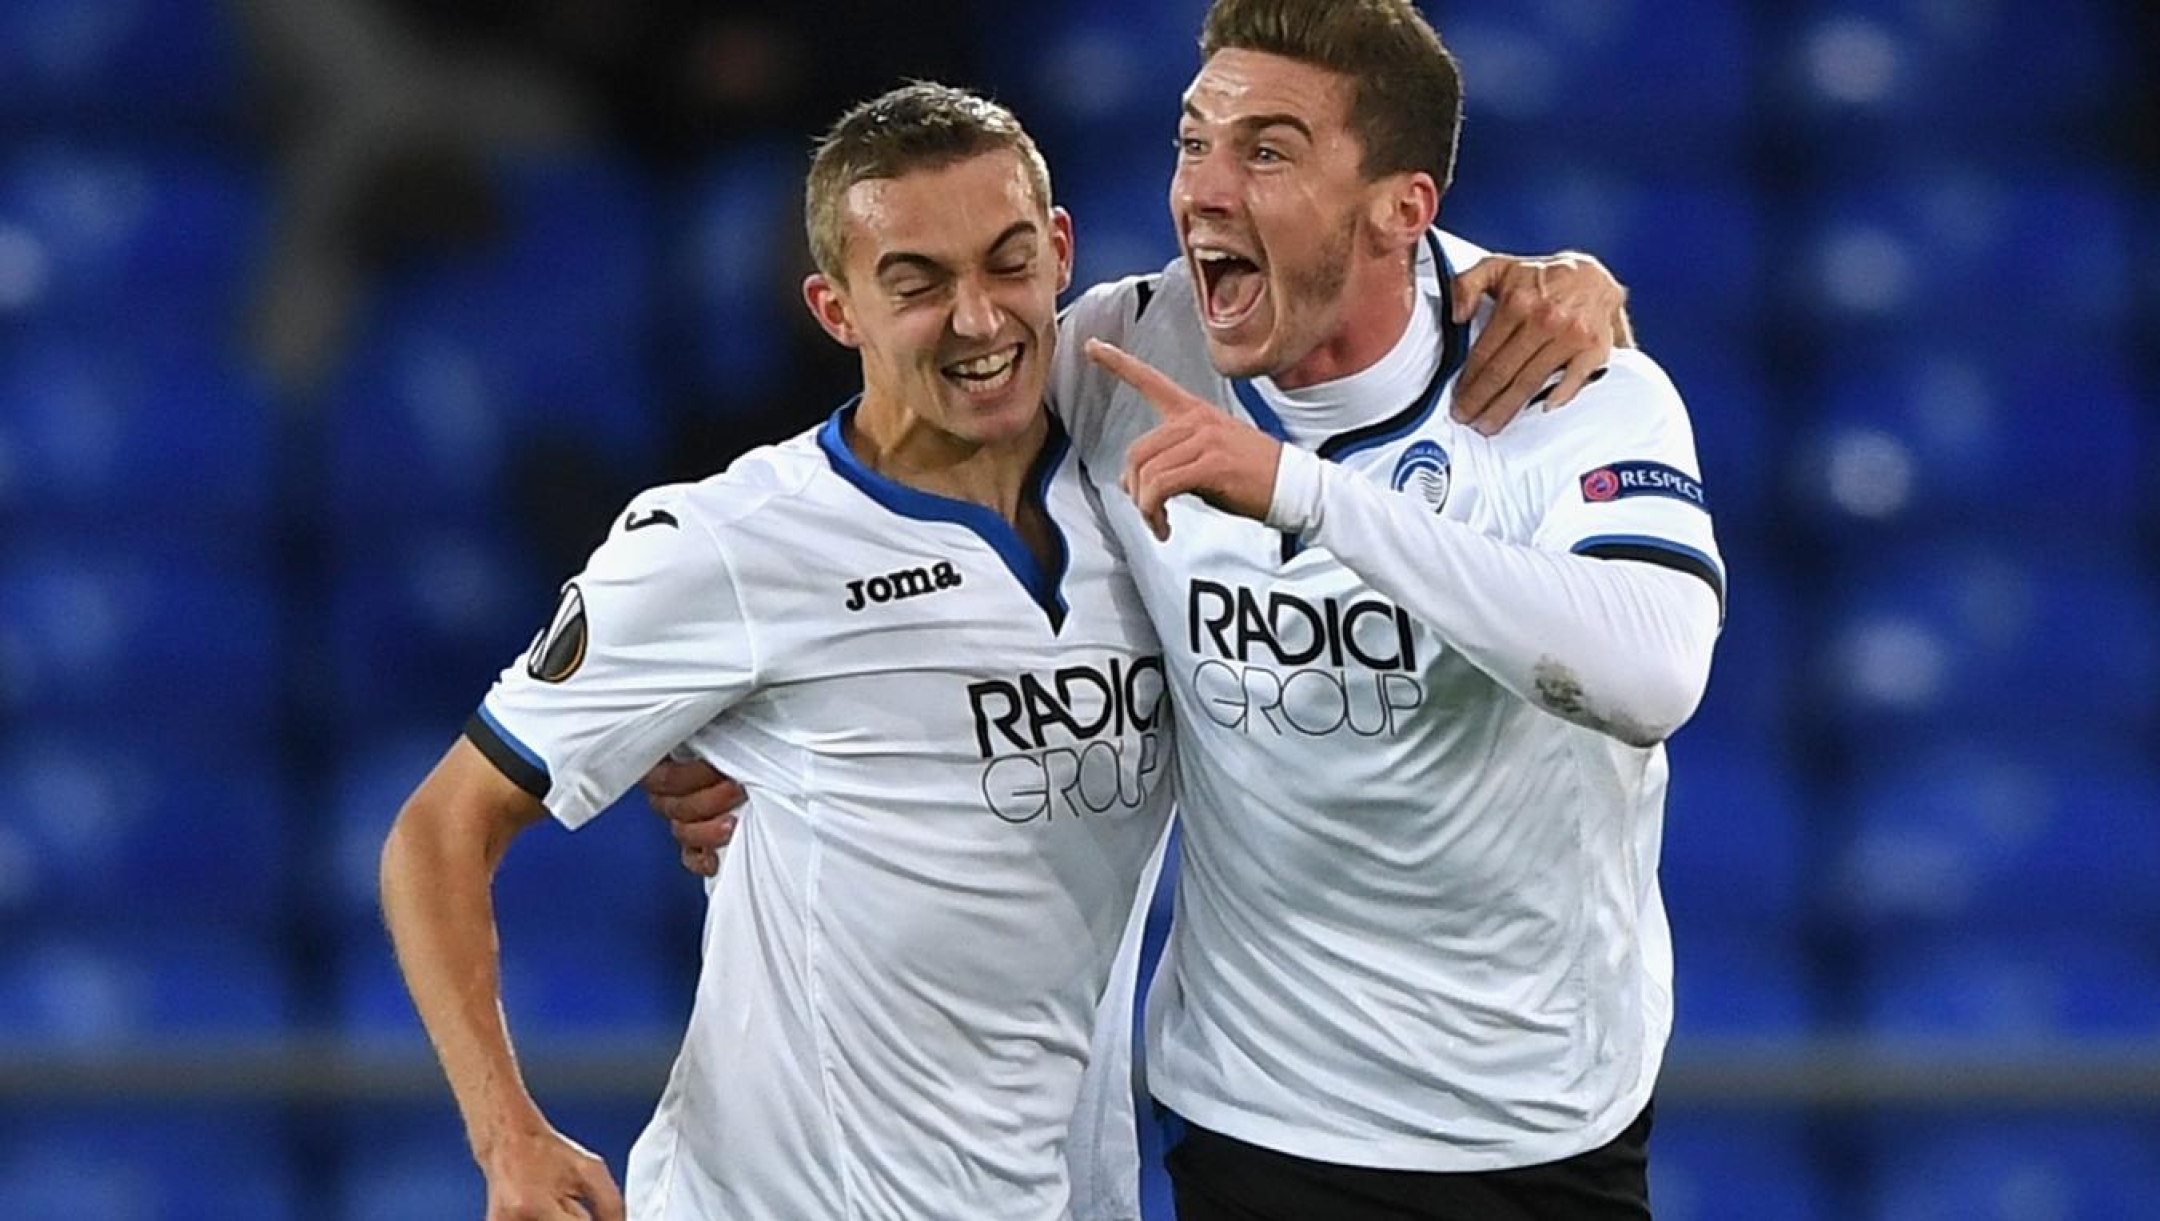 LIVERPOOL, ENGLAND - NOVEMBER 23: Robin Gosens of Atalanta celebrates after scoring his sides third goal with Timoty Castagne of Atalanta  during the UEFA Europa League group E match between Everton FC and Atalanta at Goodison Park on November 23, 2017 in Liverpool, United Kingdom.  (Photo by Gareth Copley/Getty Images)